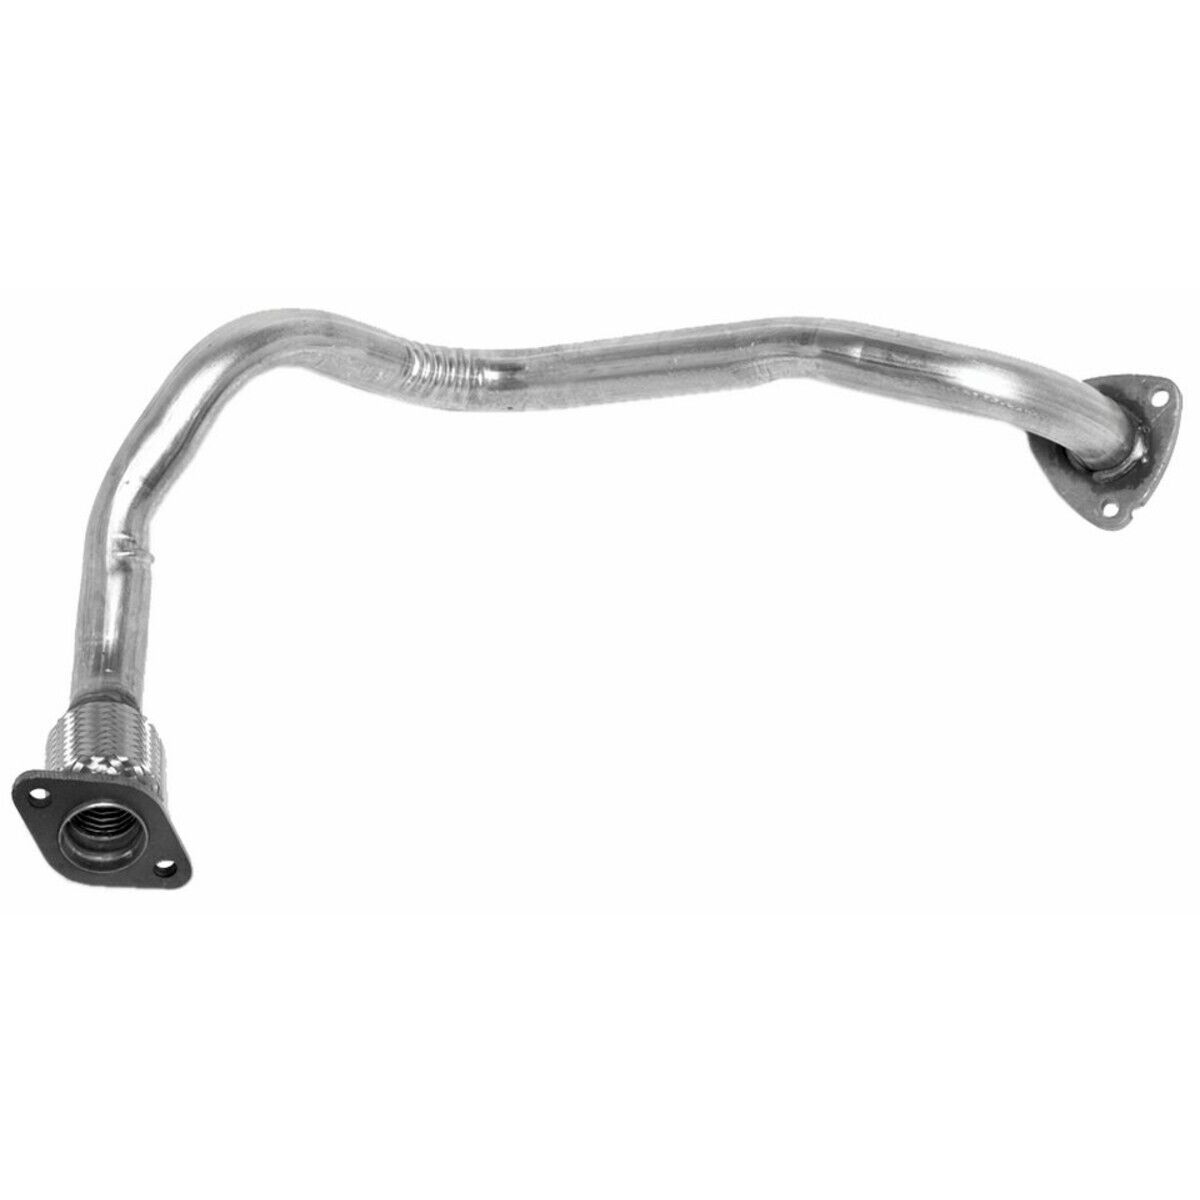 53240 Walker Exhaust Pipe for Chevy S10 Pickup Chevrolet S-10 GMC Sonoma Hombre